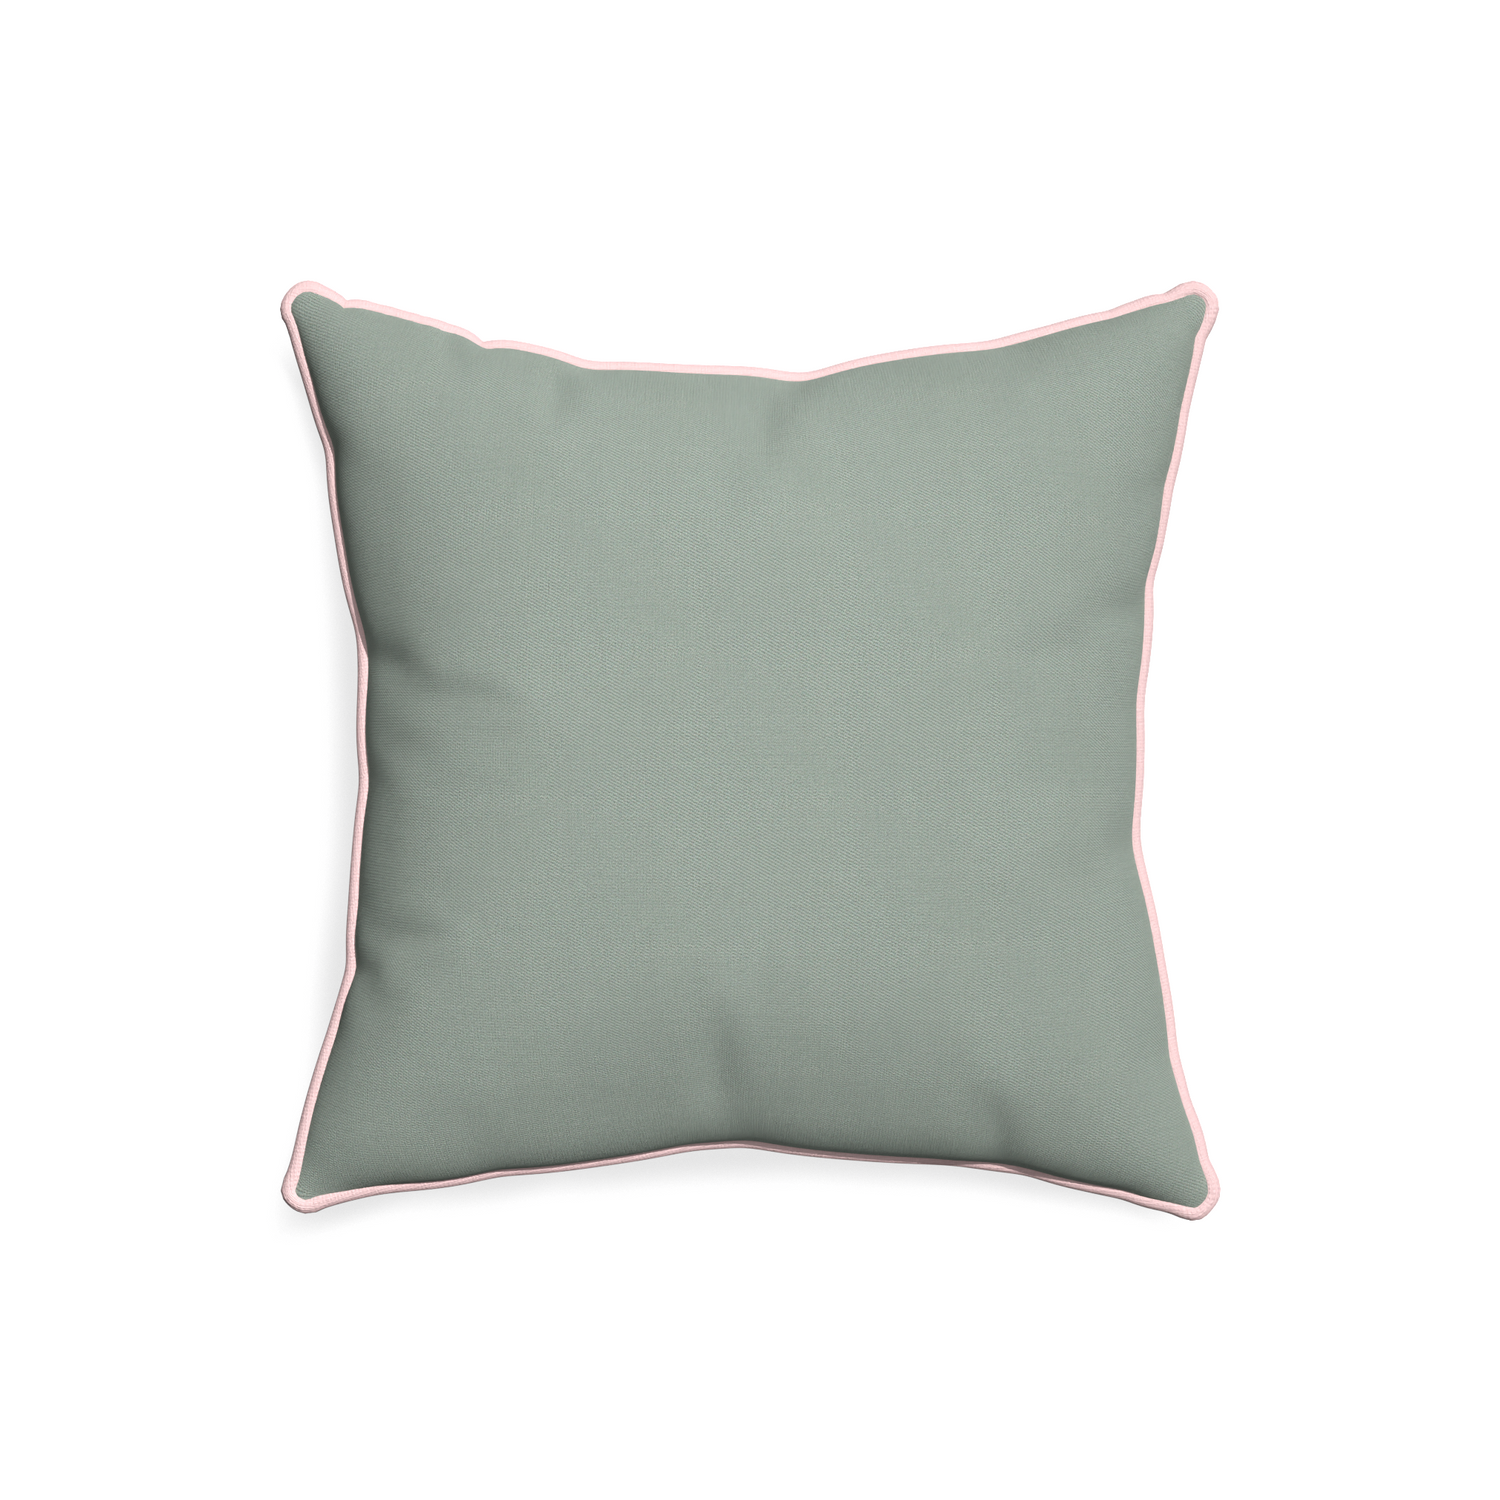 20-square sage custom sage green cottonpillow with petal piping on white background